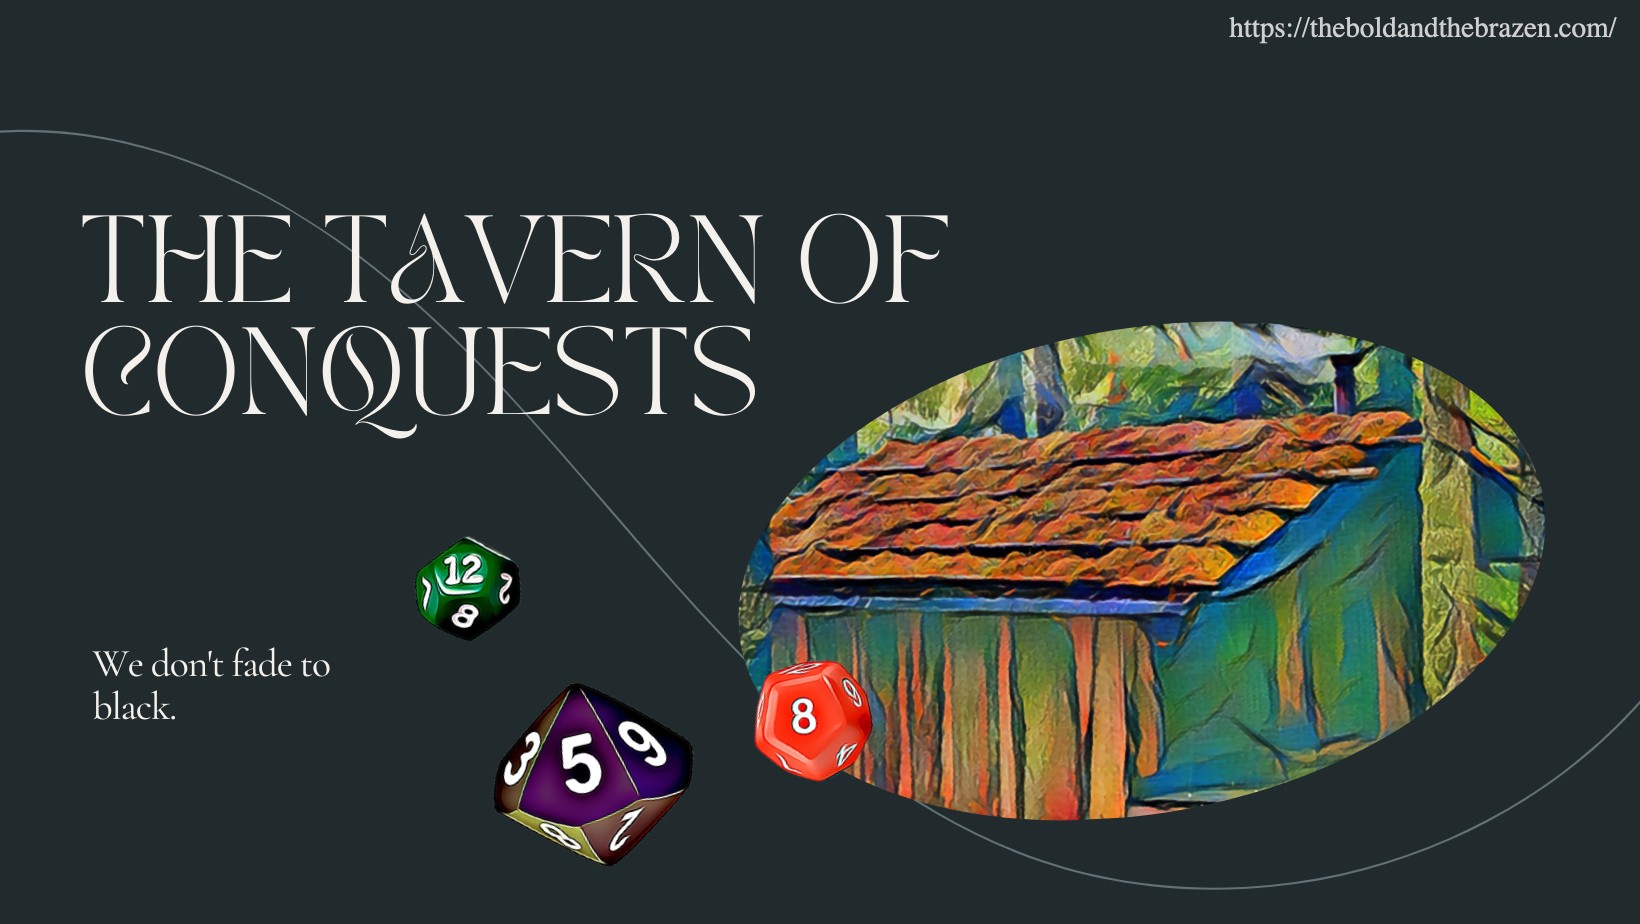 The Tavern of Conquests